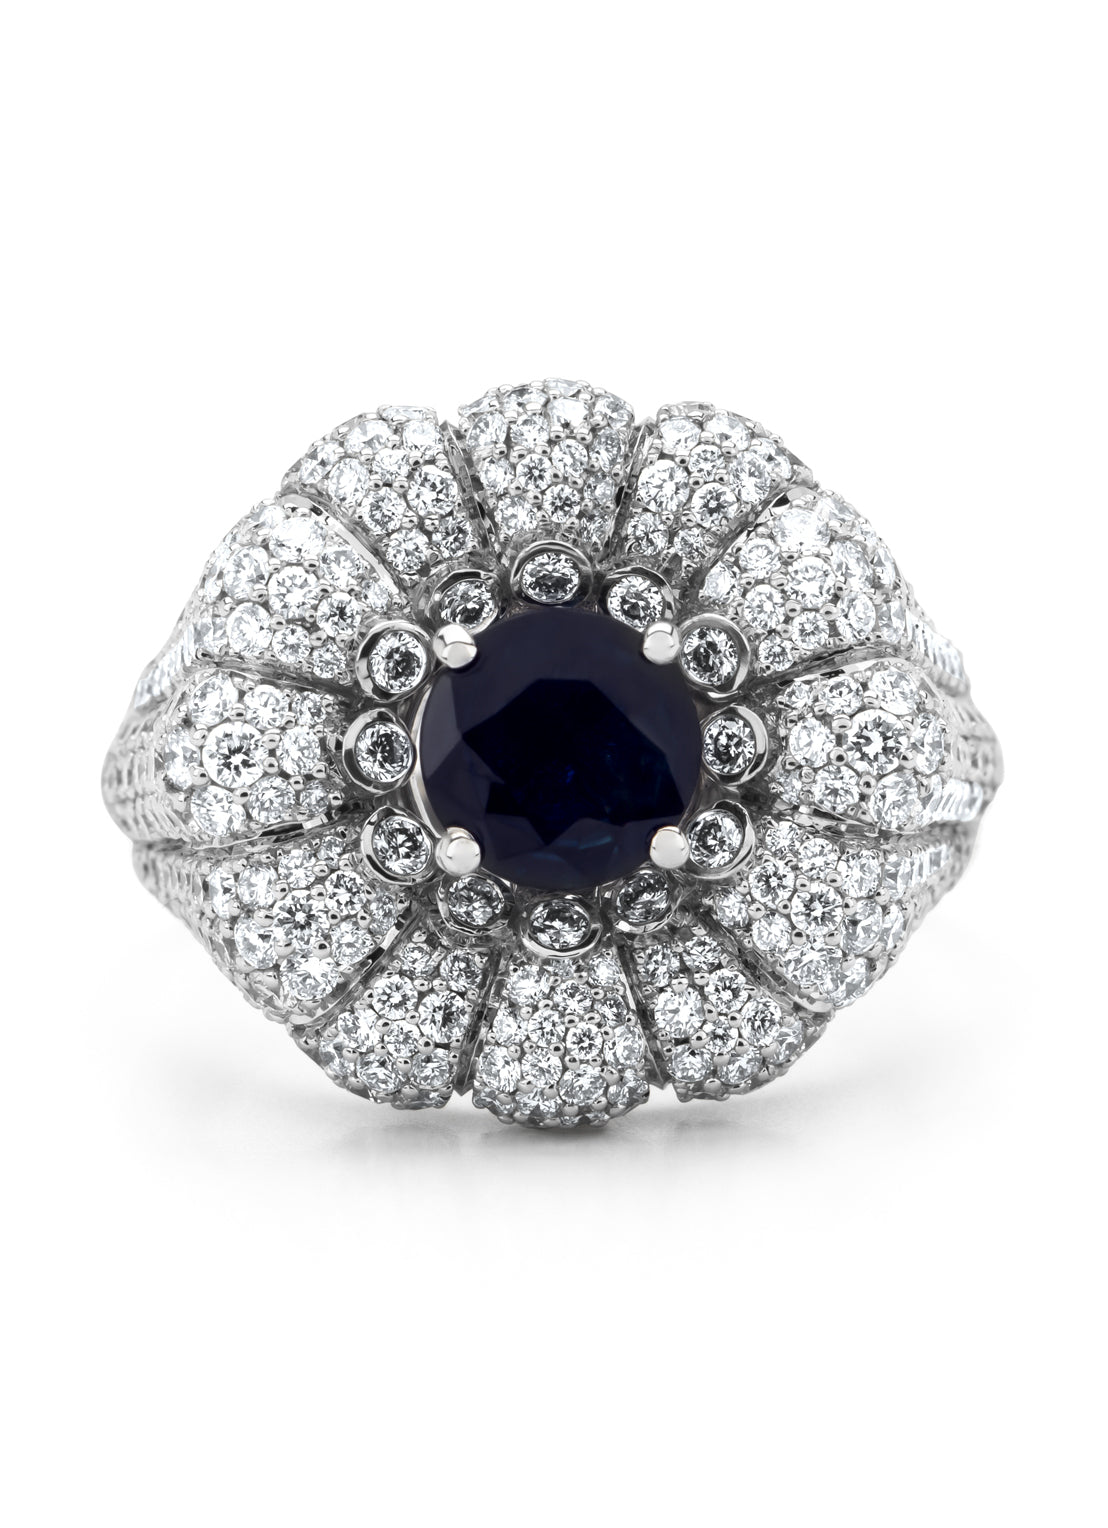 White gold ring, 1.06 ct blue sapphire, gallery